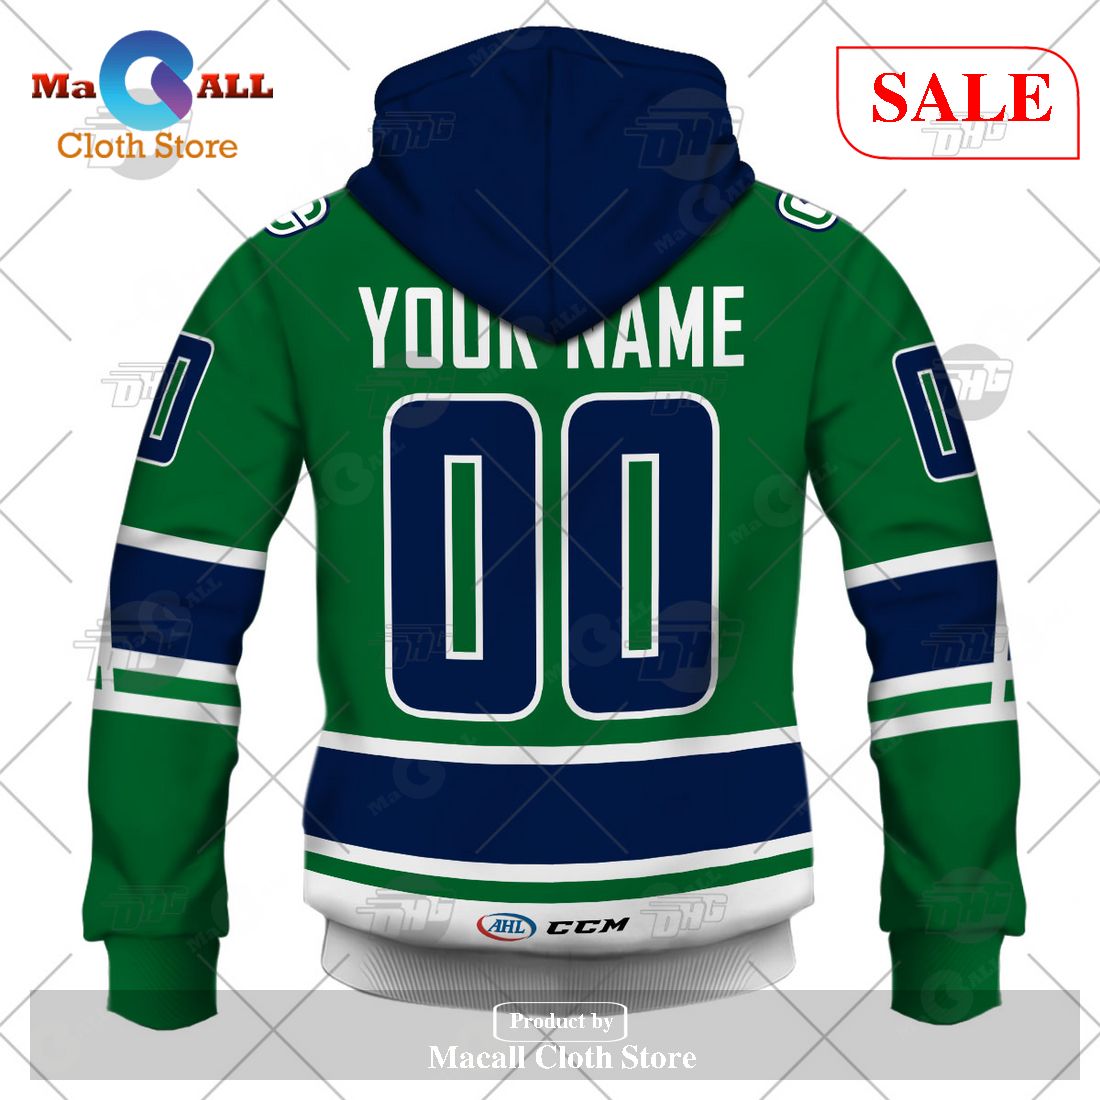 SALE] Personalized AHL Abbotsford Canucks Premier Jersey White